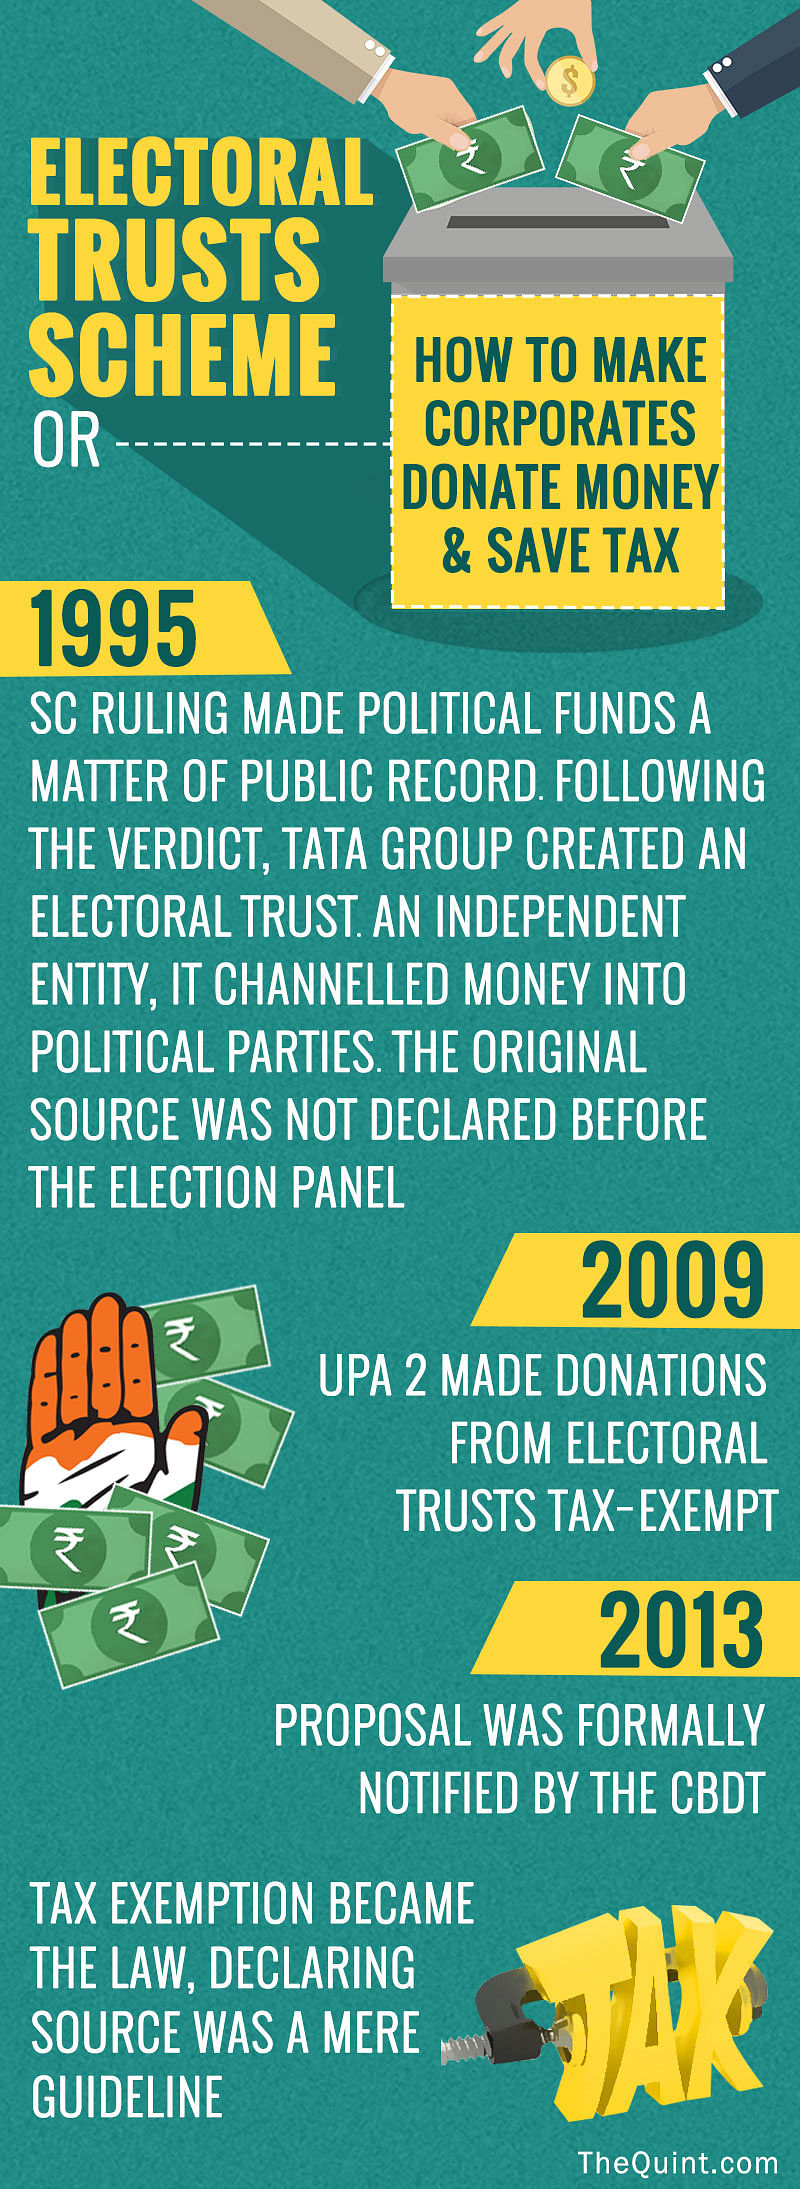 Both Congress and BJP have shown exemplary kinship to protect their source of funding from becoming public records.